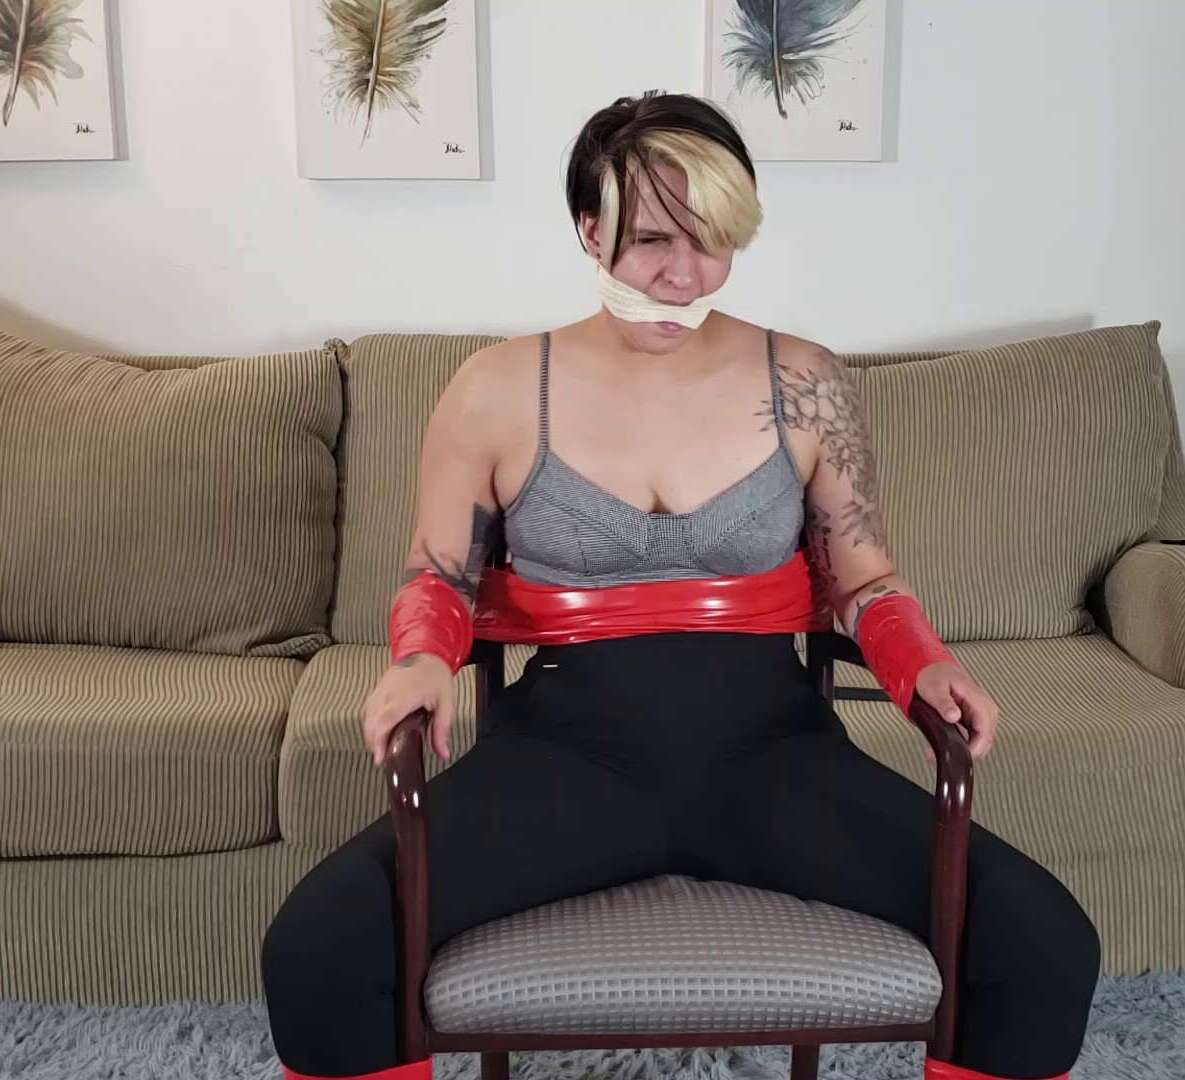 Tape Bondage - Rosie Gagged Again and Again! - Cinched and Secured